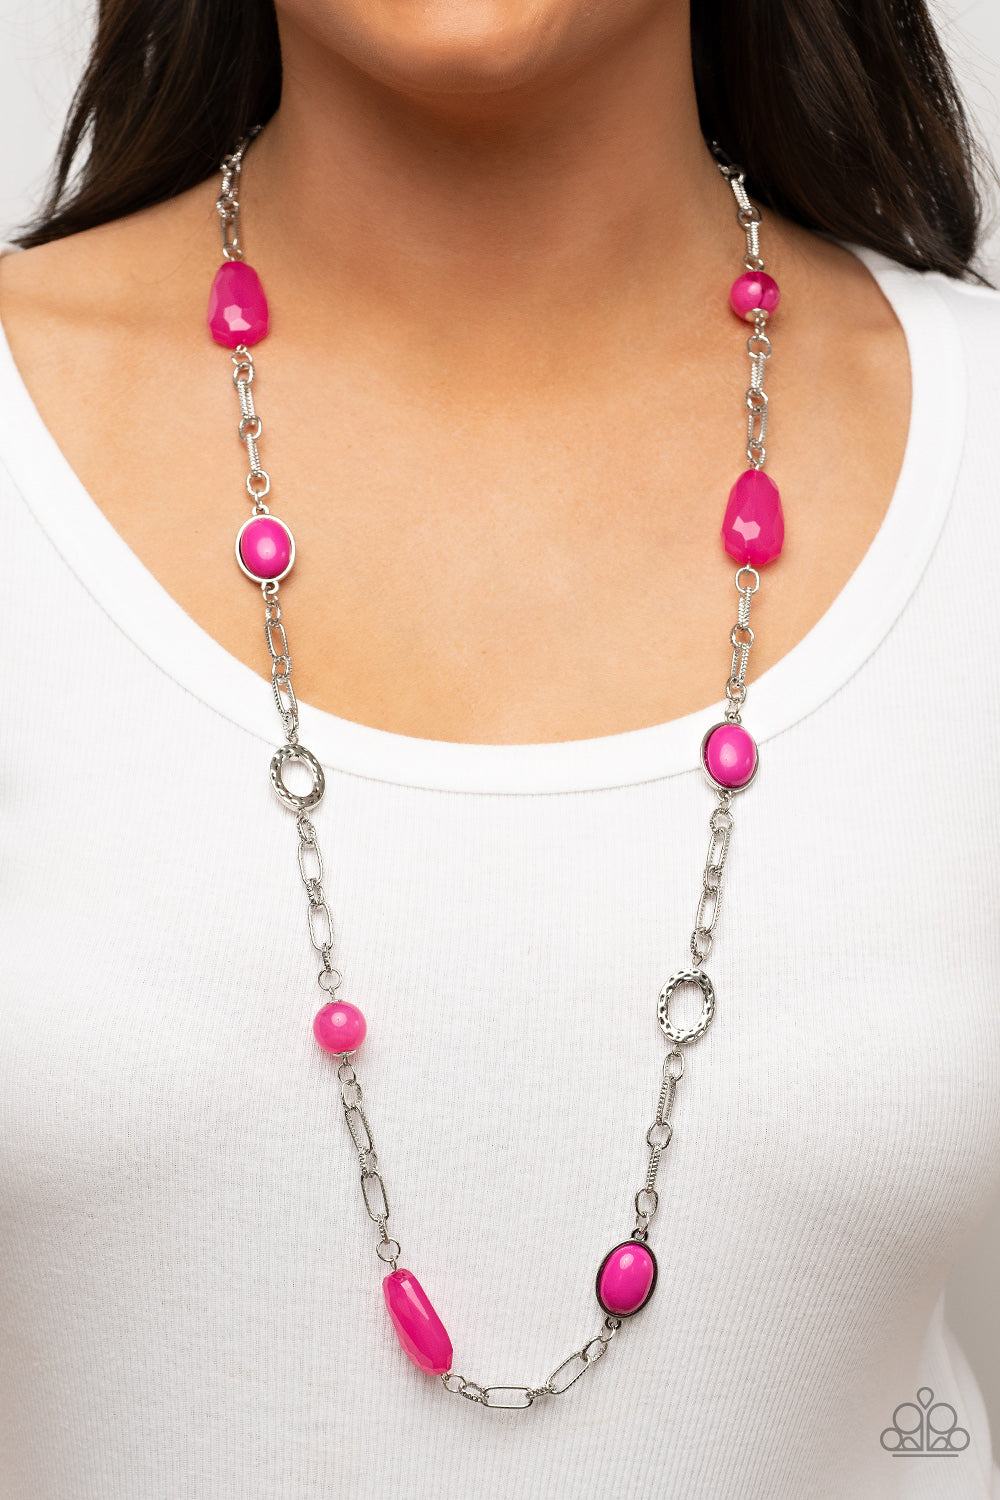 Barcelona Bash - Fuchsia Pink Necklace - Paparazzi Accessories - Featuring acrylic, faceted, and glassy finishes, a refreshing assortment of Fuchsia Fedora beads and gems join hammered silver discs along oversized textured links across the chest for a playful splash of color.